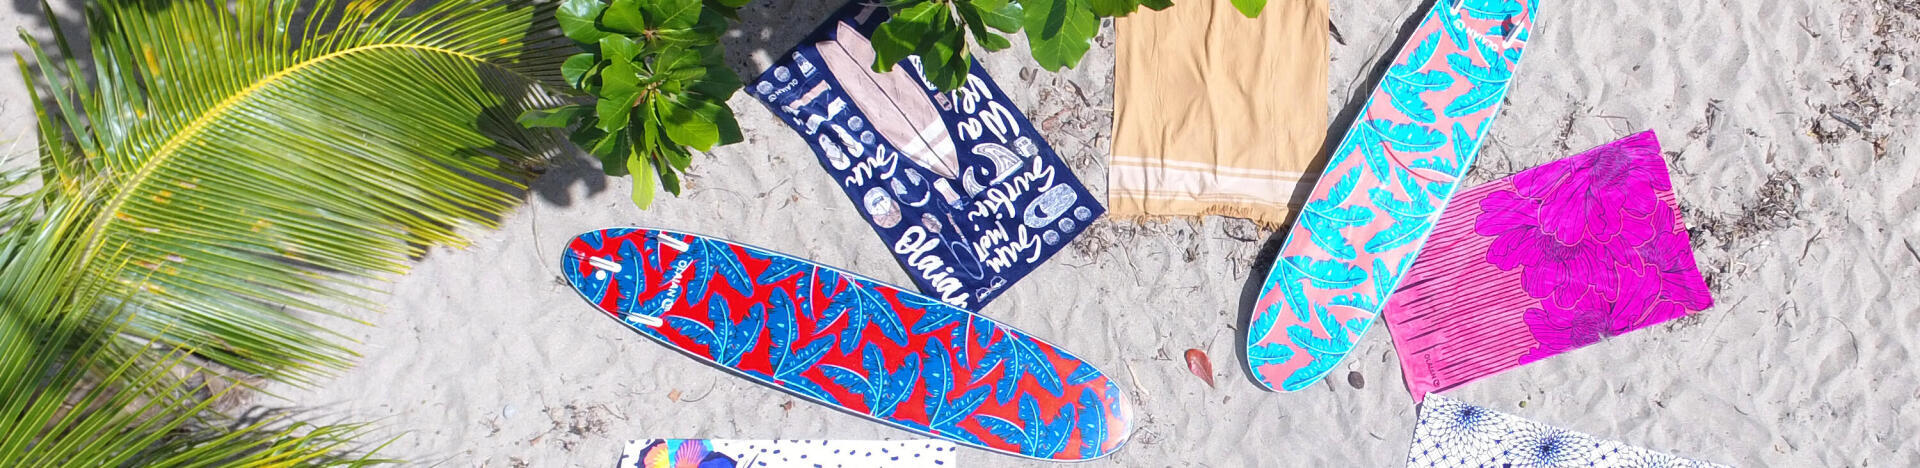 beach towels and surf boards on the beach